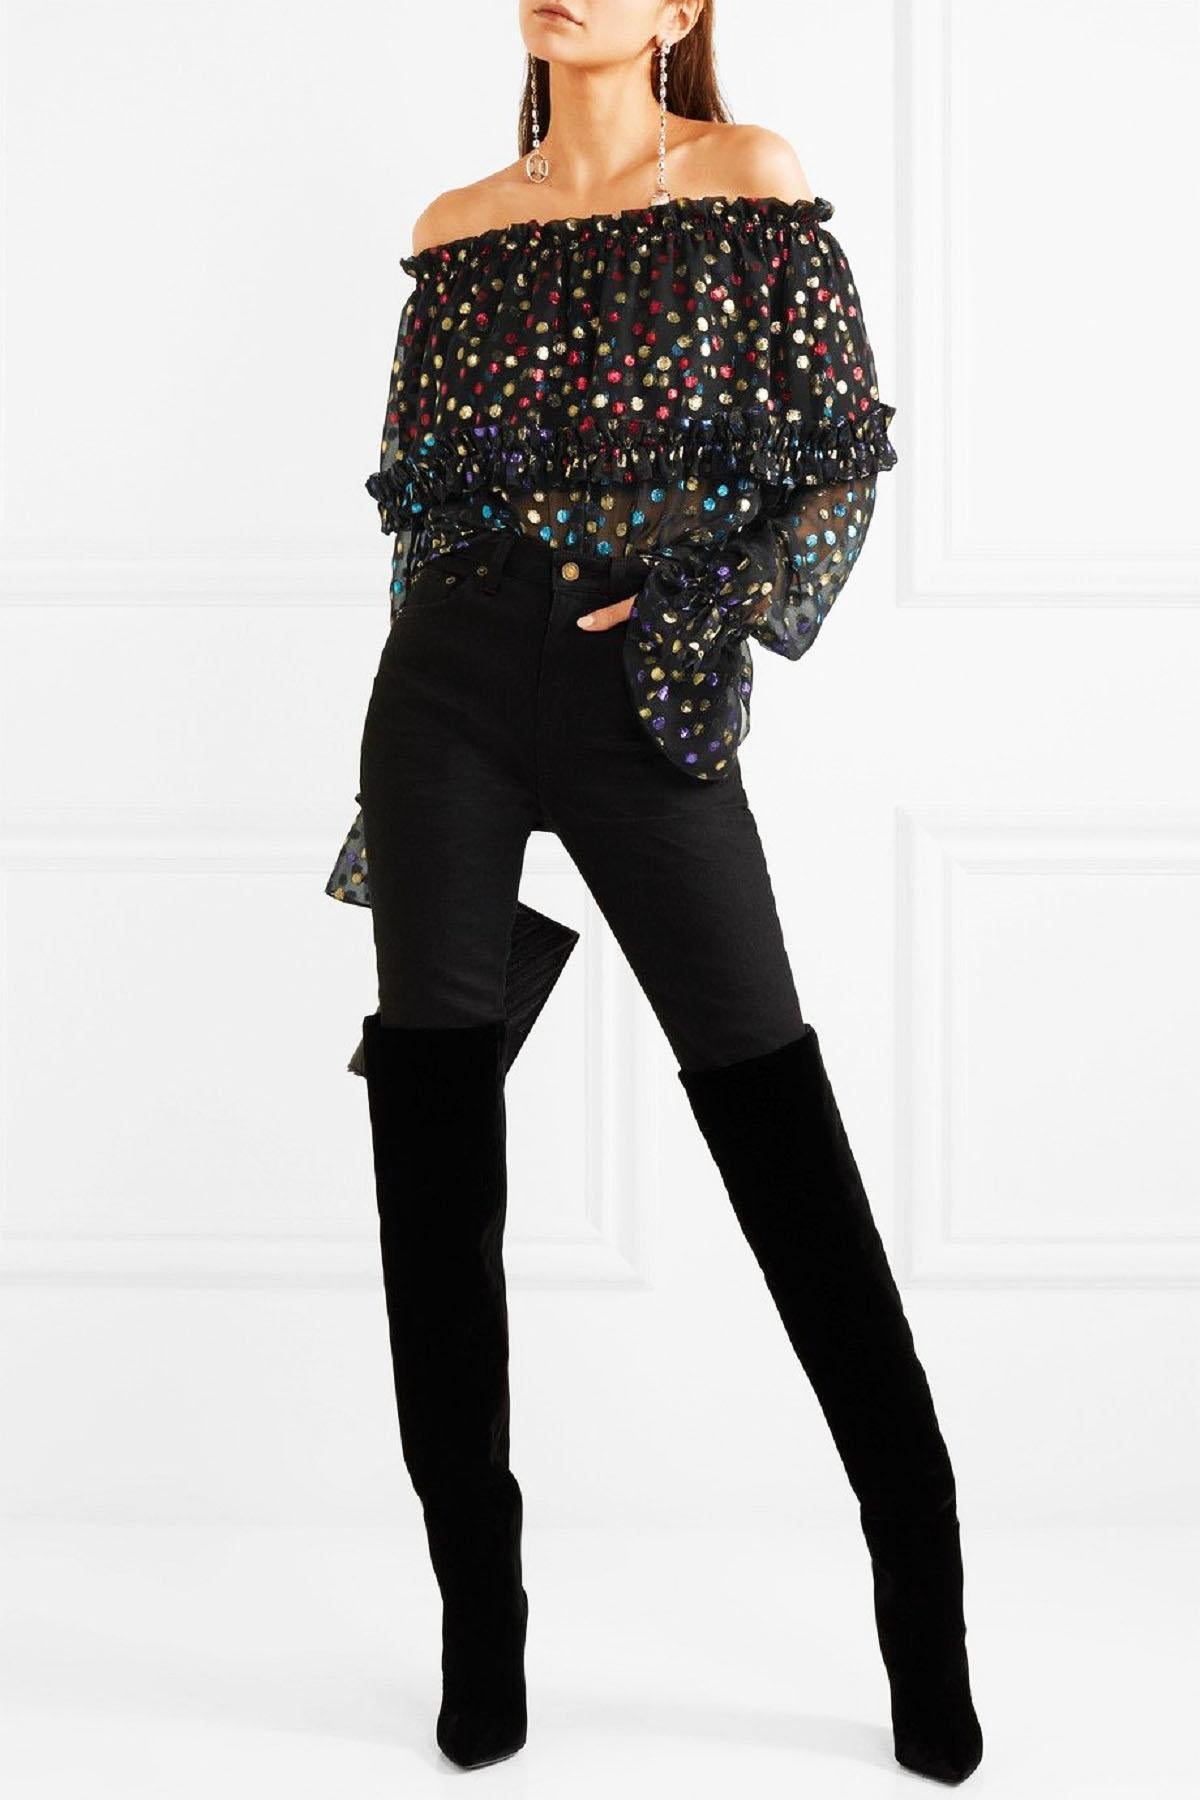 New Saint Laurent Black Off-Shoulder Fil Coupe Chiffon Blouse
French size 42 ( oversize ) - US size 10
S/S 2018 Runway Collection
Saint Laurent's party blouse twinkles with hundreds of colorful metallic fil coupé polka-dots, which are more than